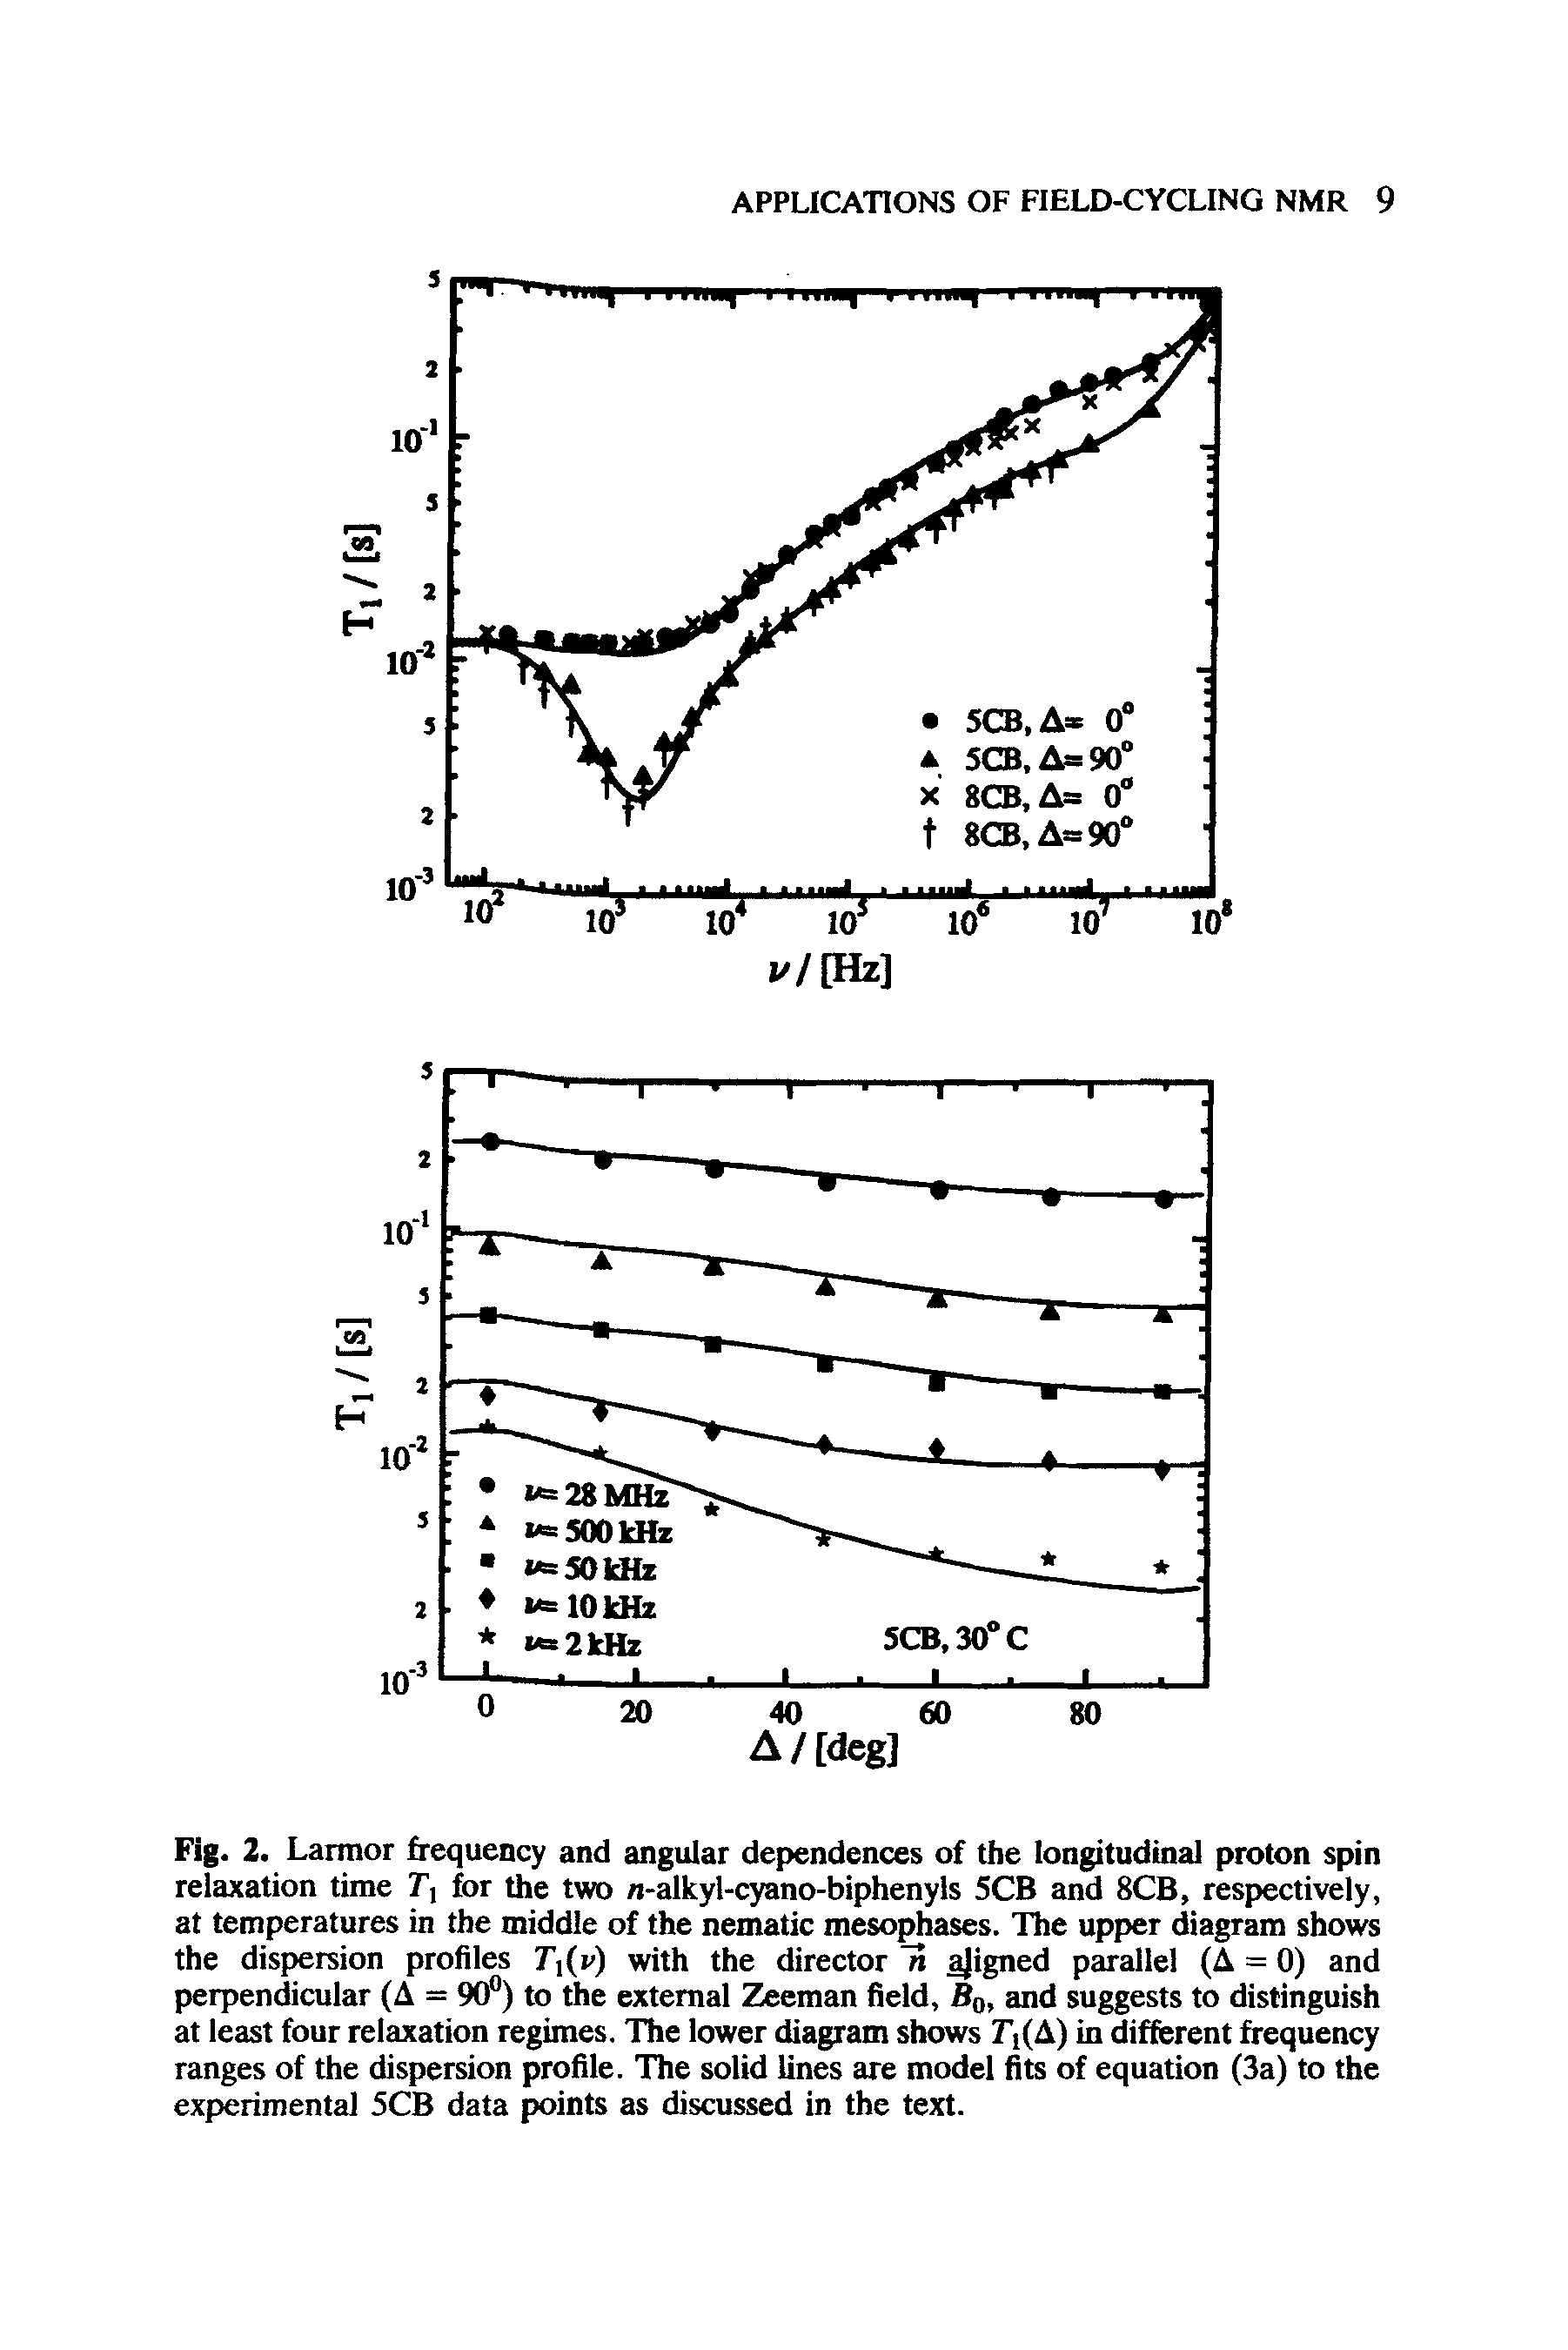 Fig. 2. Larmor frequency and angular dependences of the longitudinal proton spin relaxation time Tj for the two /i-alkyl-cyano-biphenyls 5CB and 8CB, respectively, at temperatures in the middle of the nematic mesophases. The upper diagram shows the dispersion profiles Ti(v) with the director H a igned parallel (A = 0) and perpendicular (A = 90 ) to the external 2 eman field, Bq, and suggests to distinguish at least four relaxation regimes. The lower diagram shows ri(A) in different frequency ranges of the dispersion profile. The solid lines are model fits of equation (3a) to the experimental 5CB data points as discussed in the text.